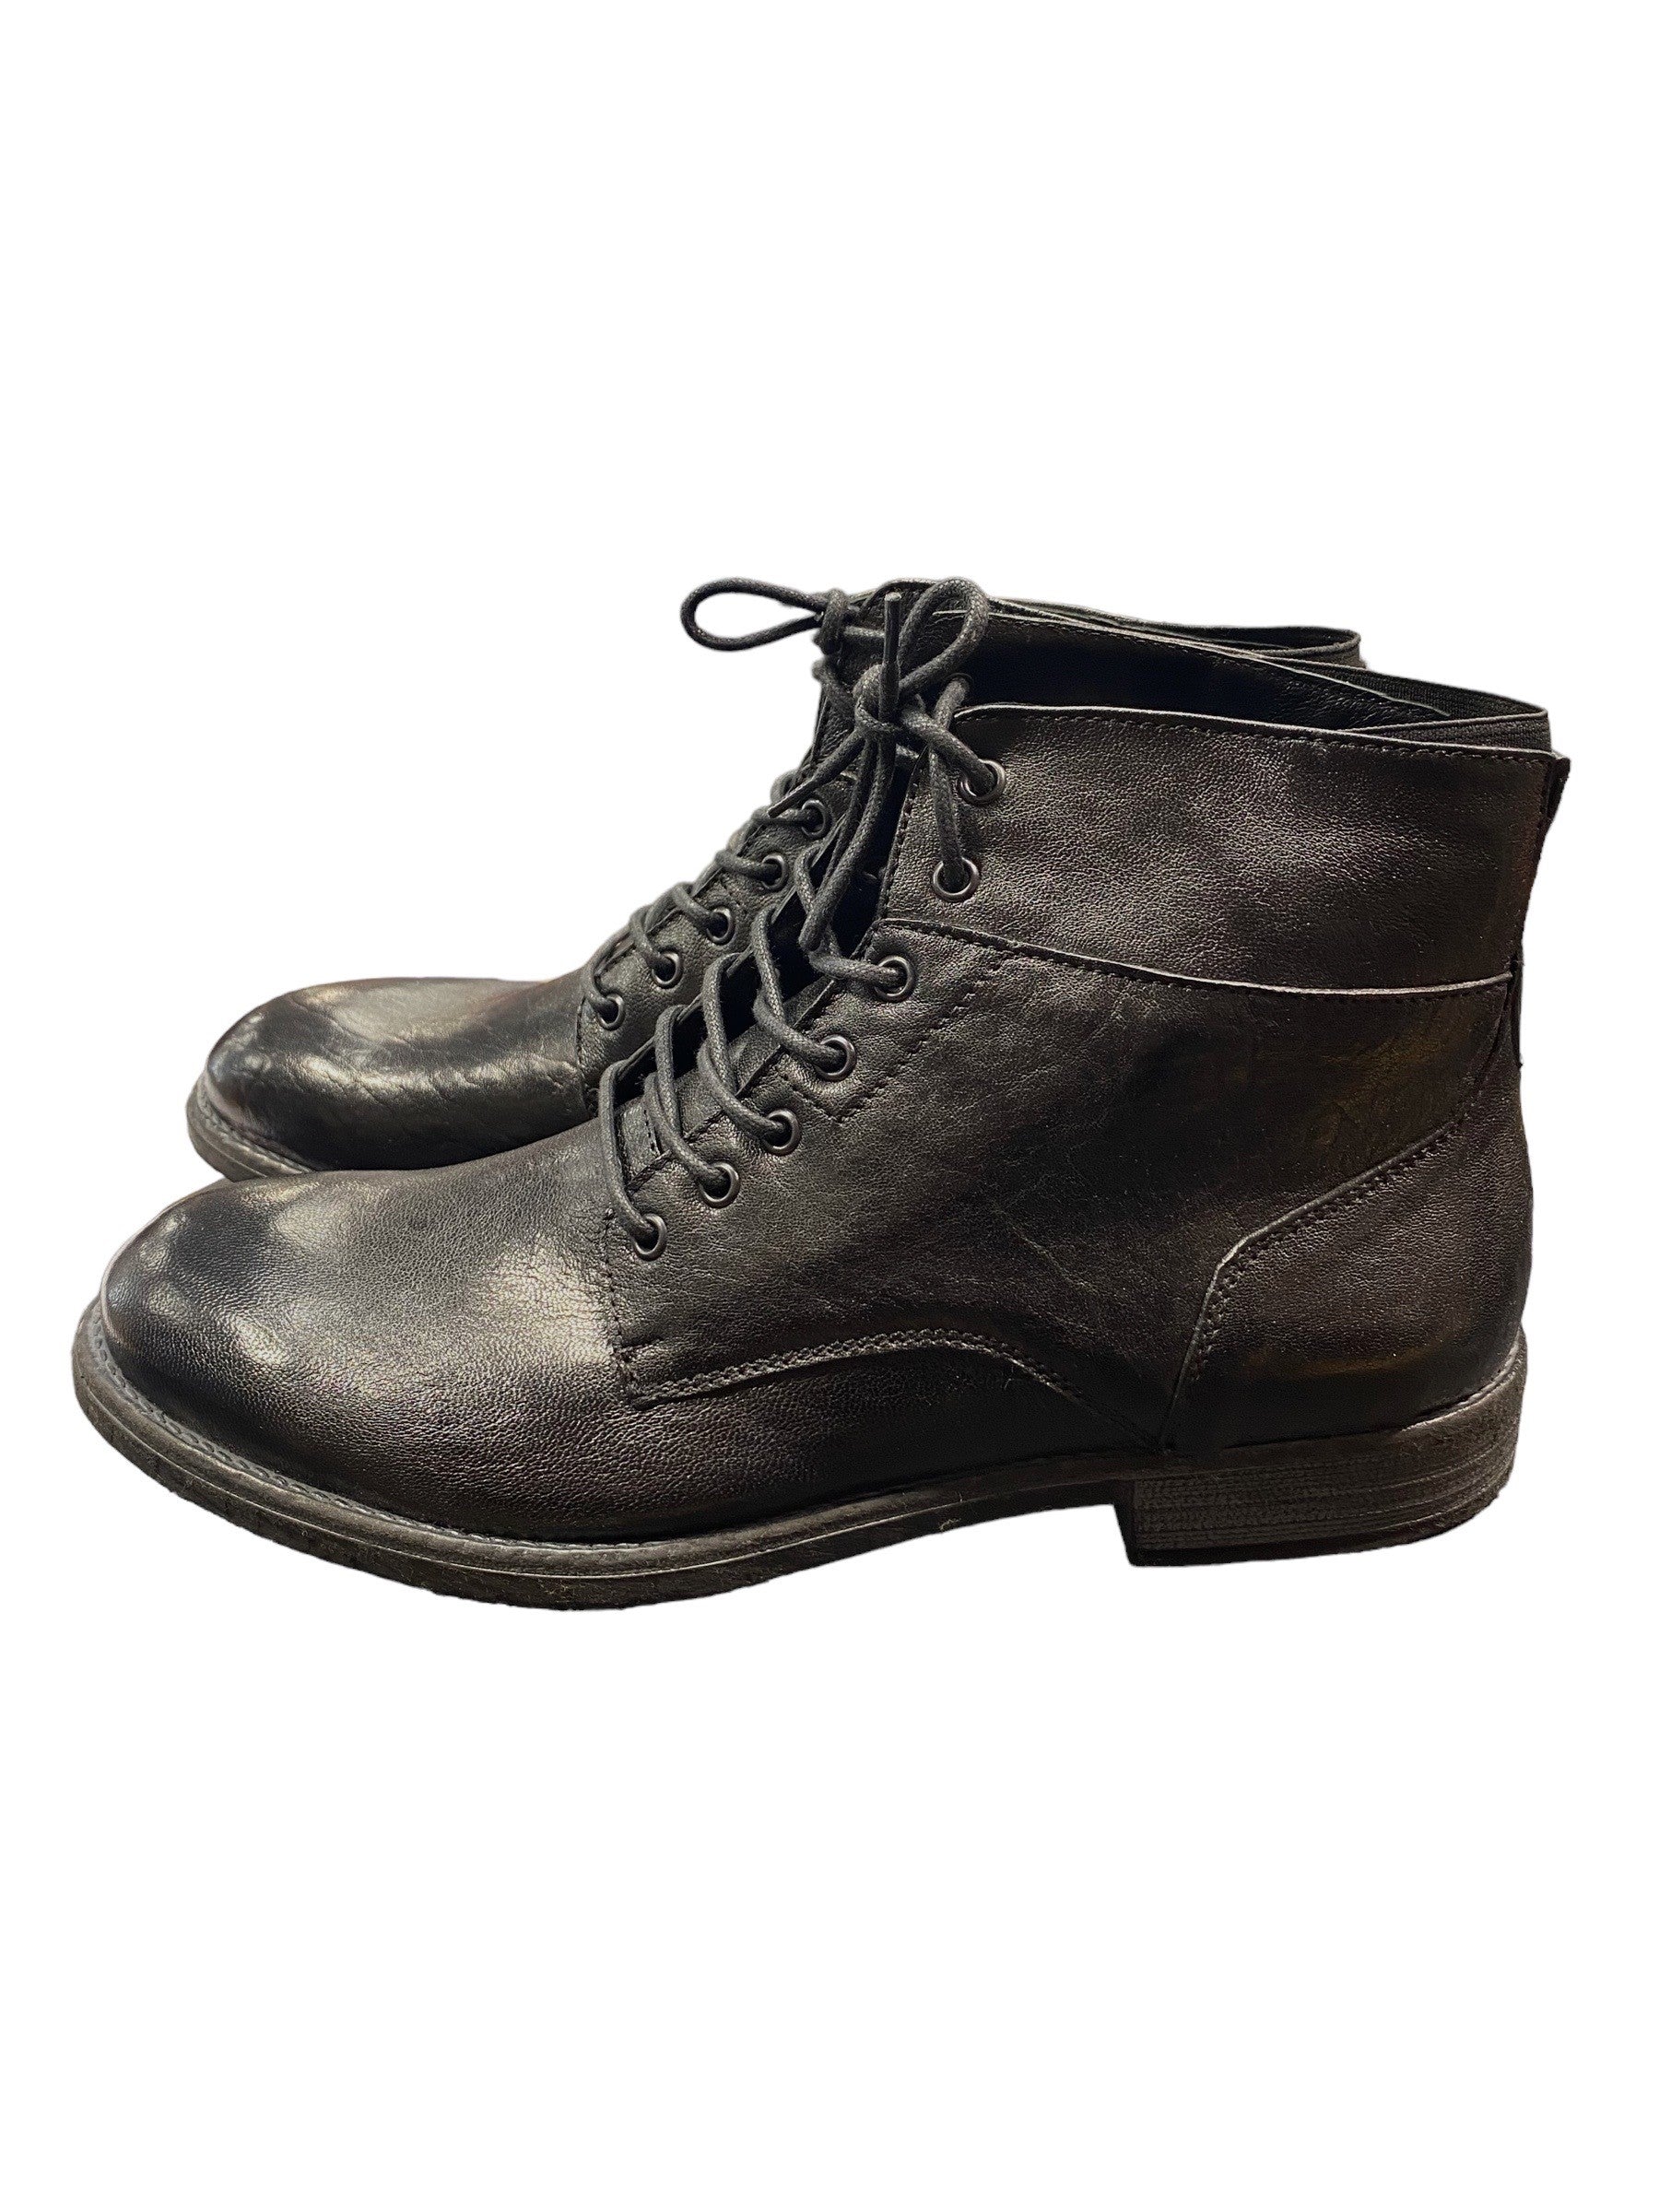 Emporio Italia - Coraf Leather Lace Up Boots - Black or Brown ...